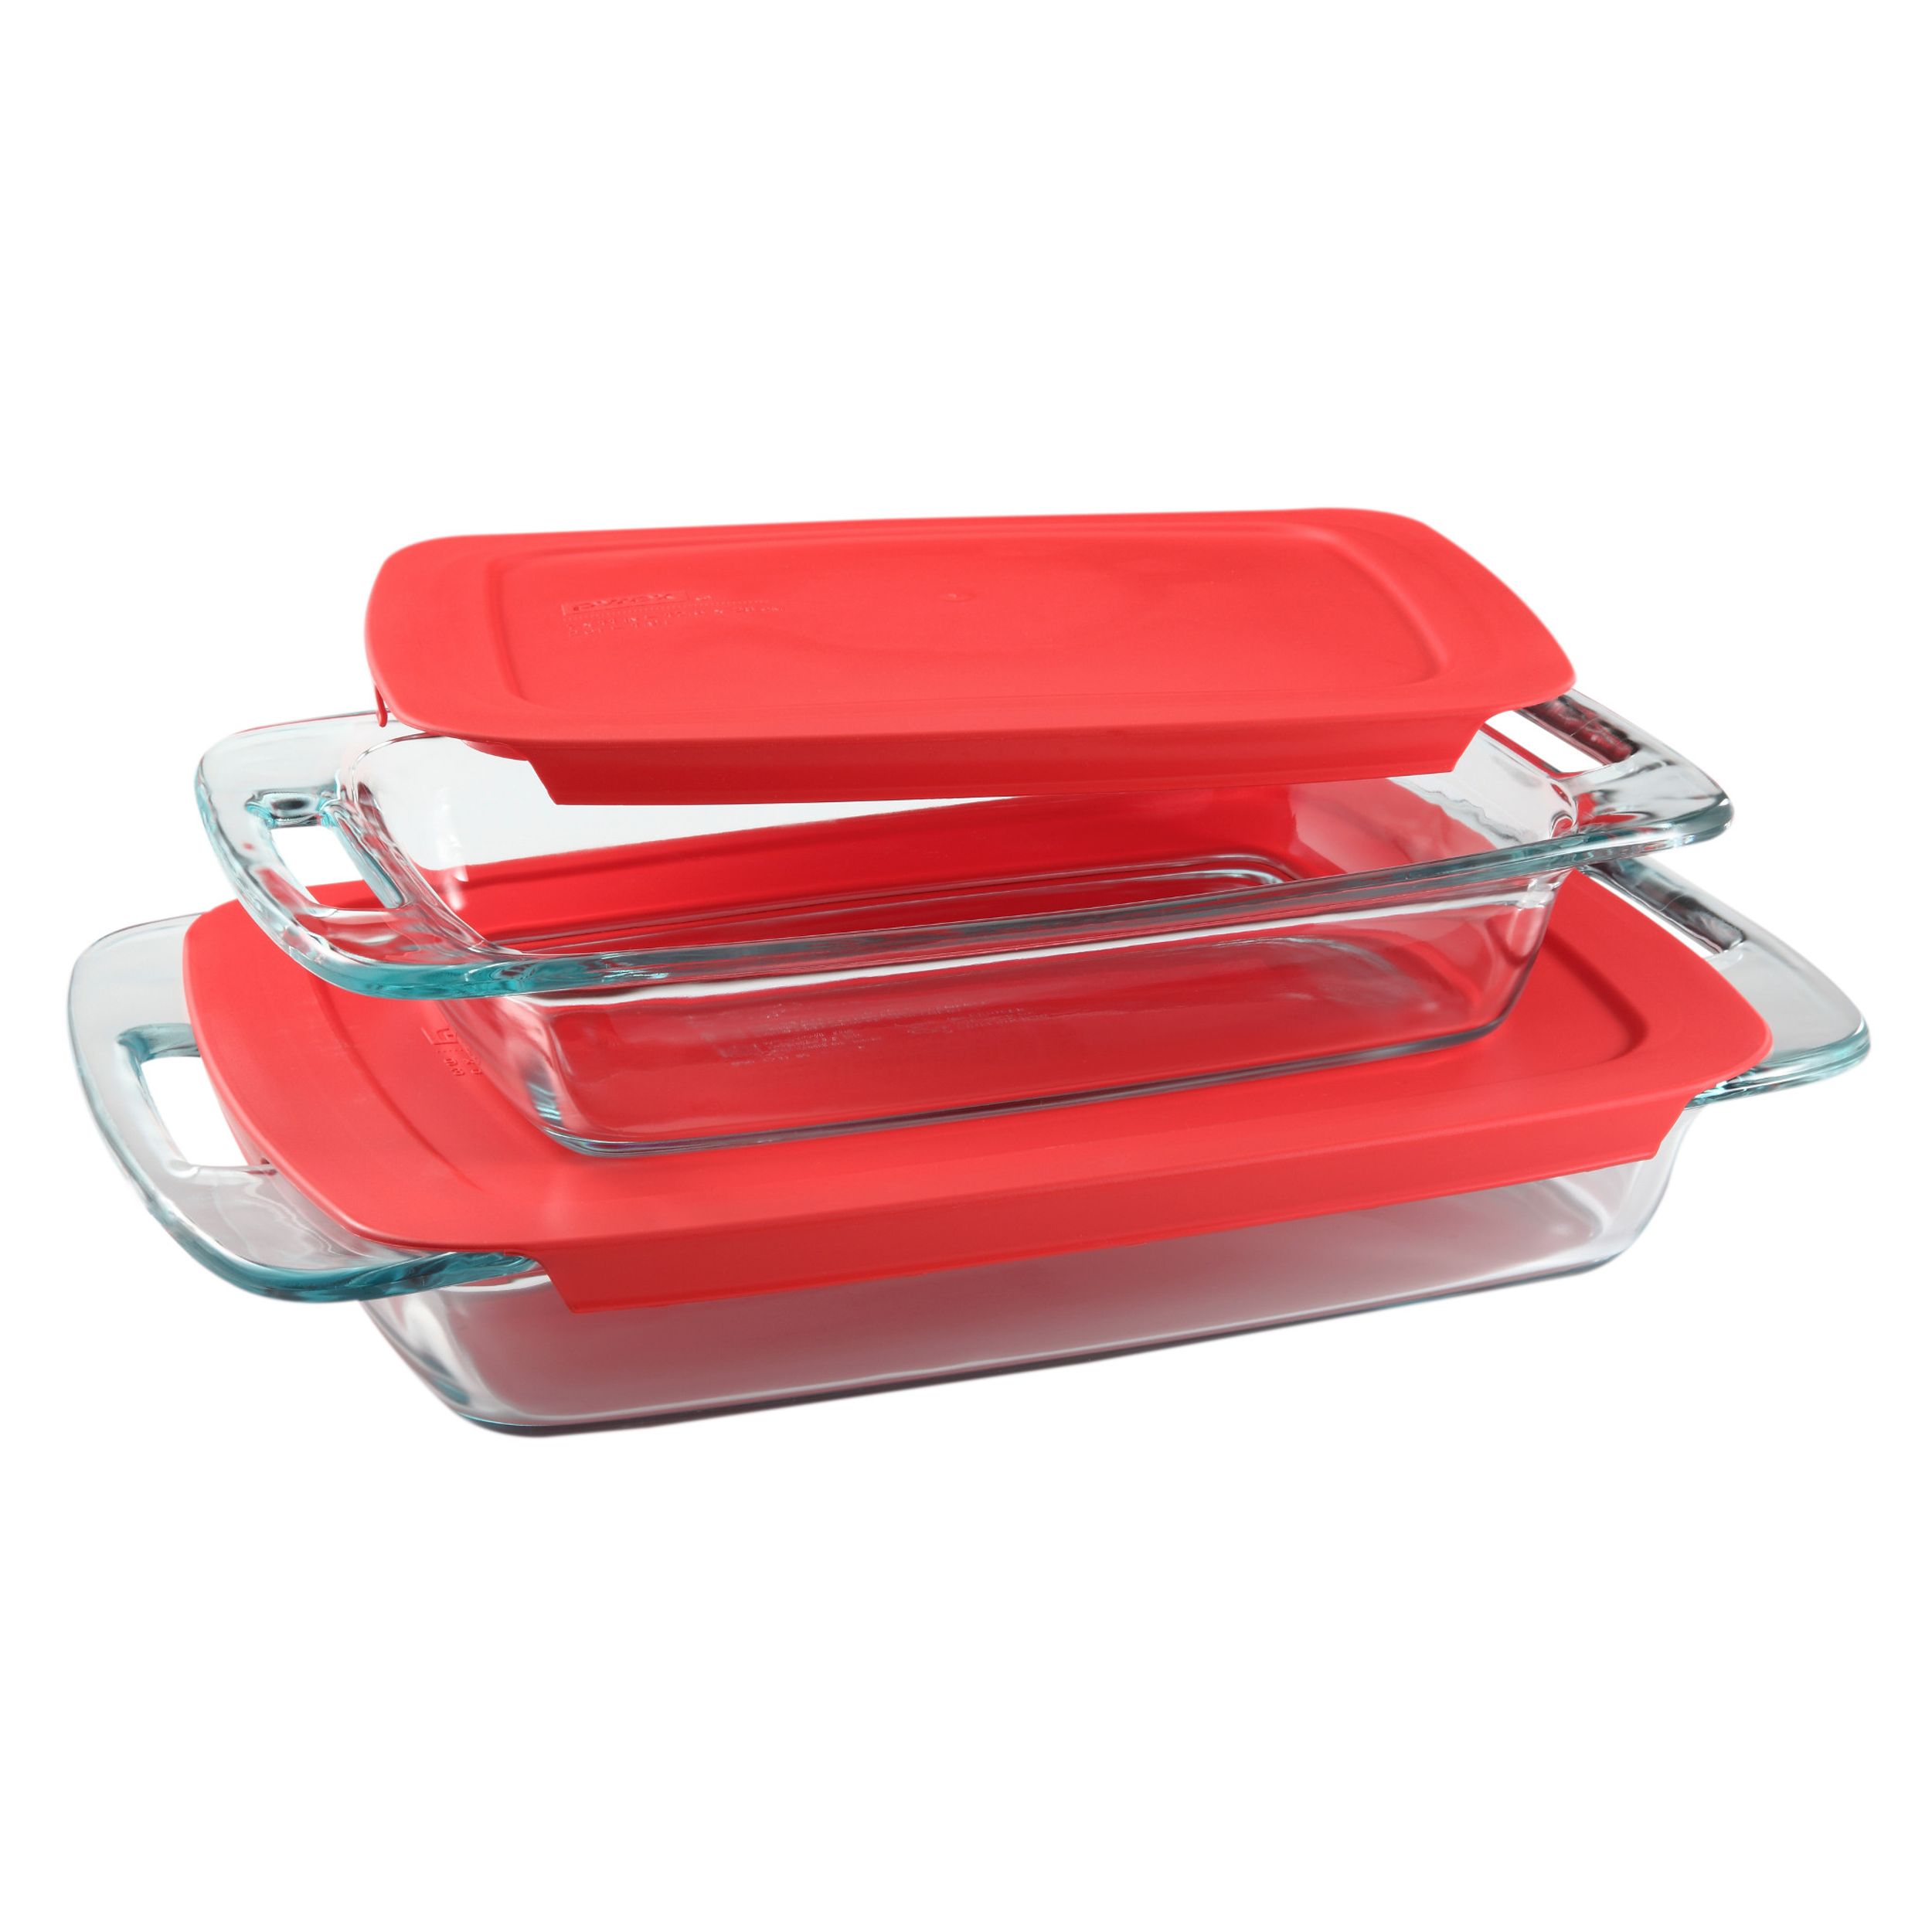 Pyrex Easy Grab 4-piece Rectangular Glass Bakeware Set with Red Lids - image 1 of 10